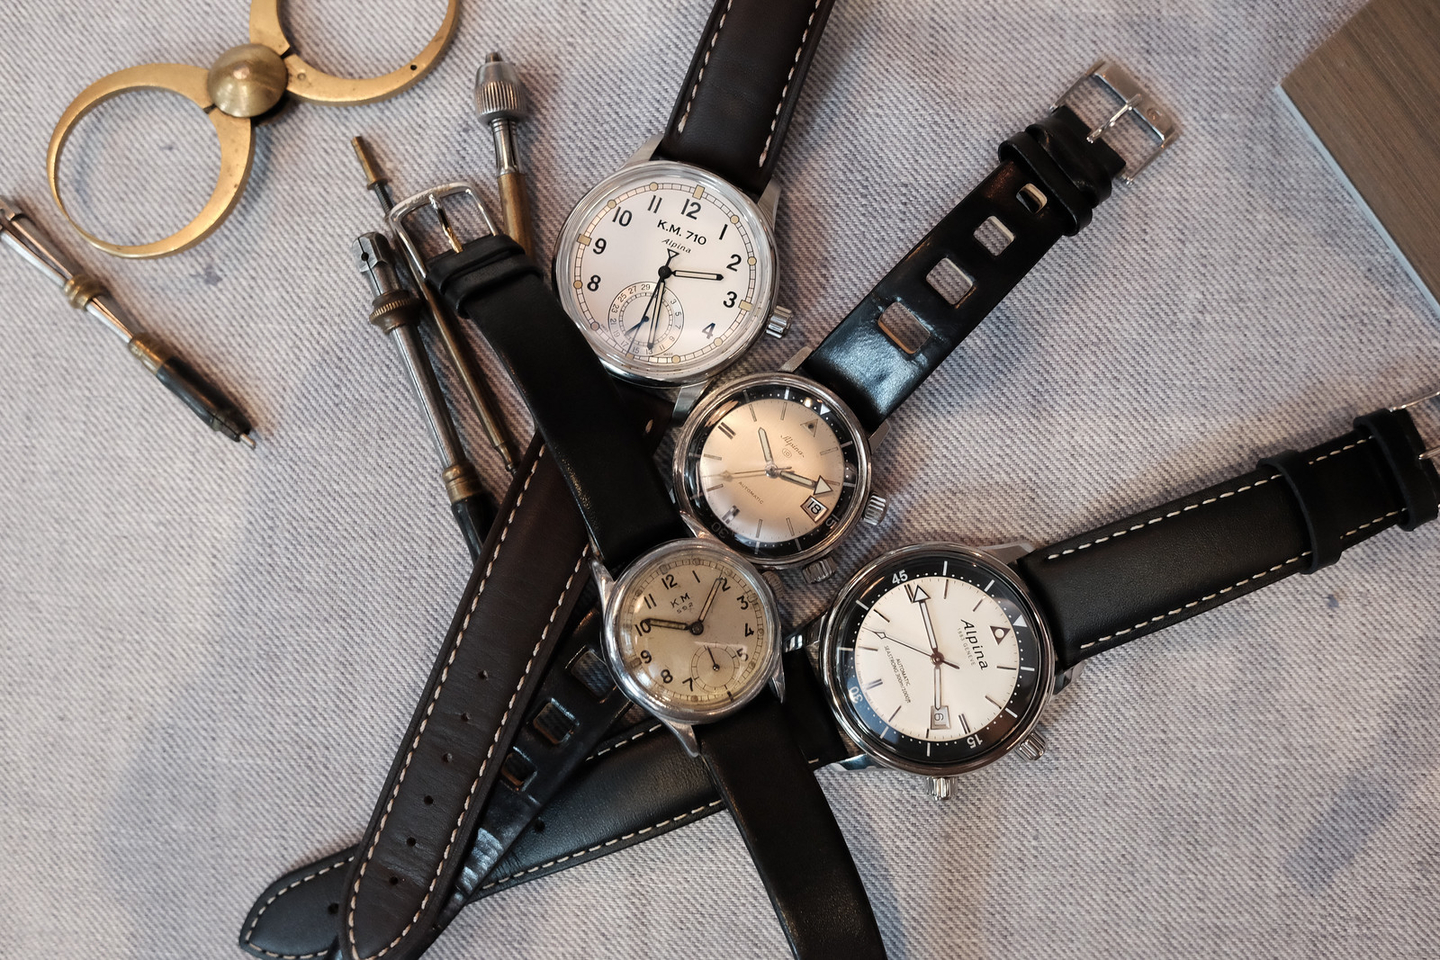 Two new Alpina Heritage timepieces, and the vintage watches that inspired them